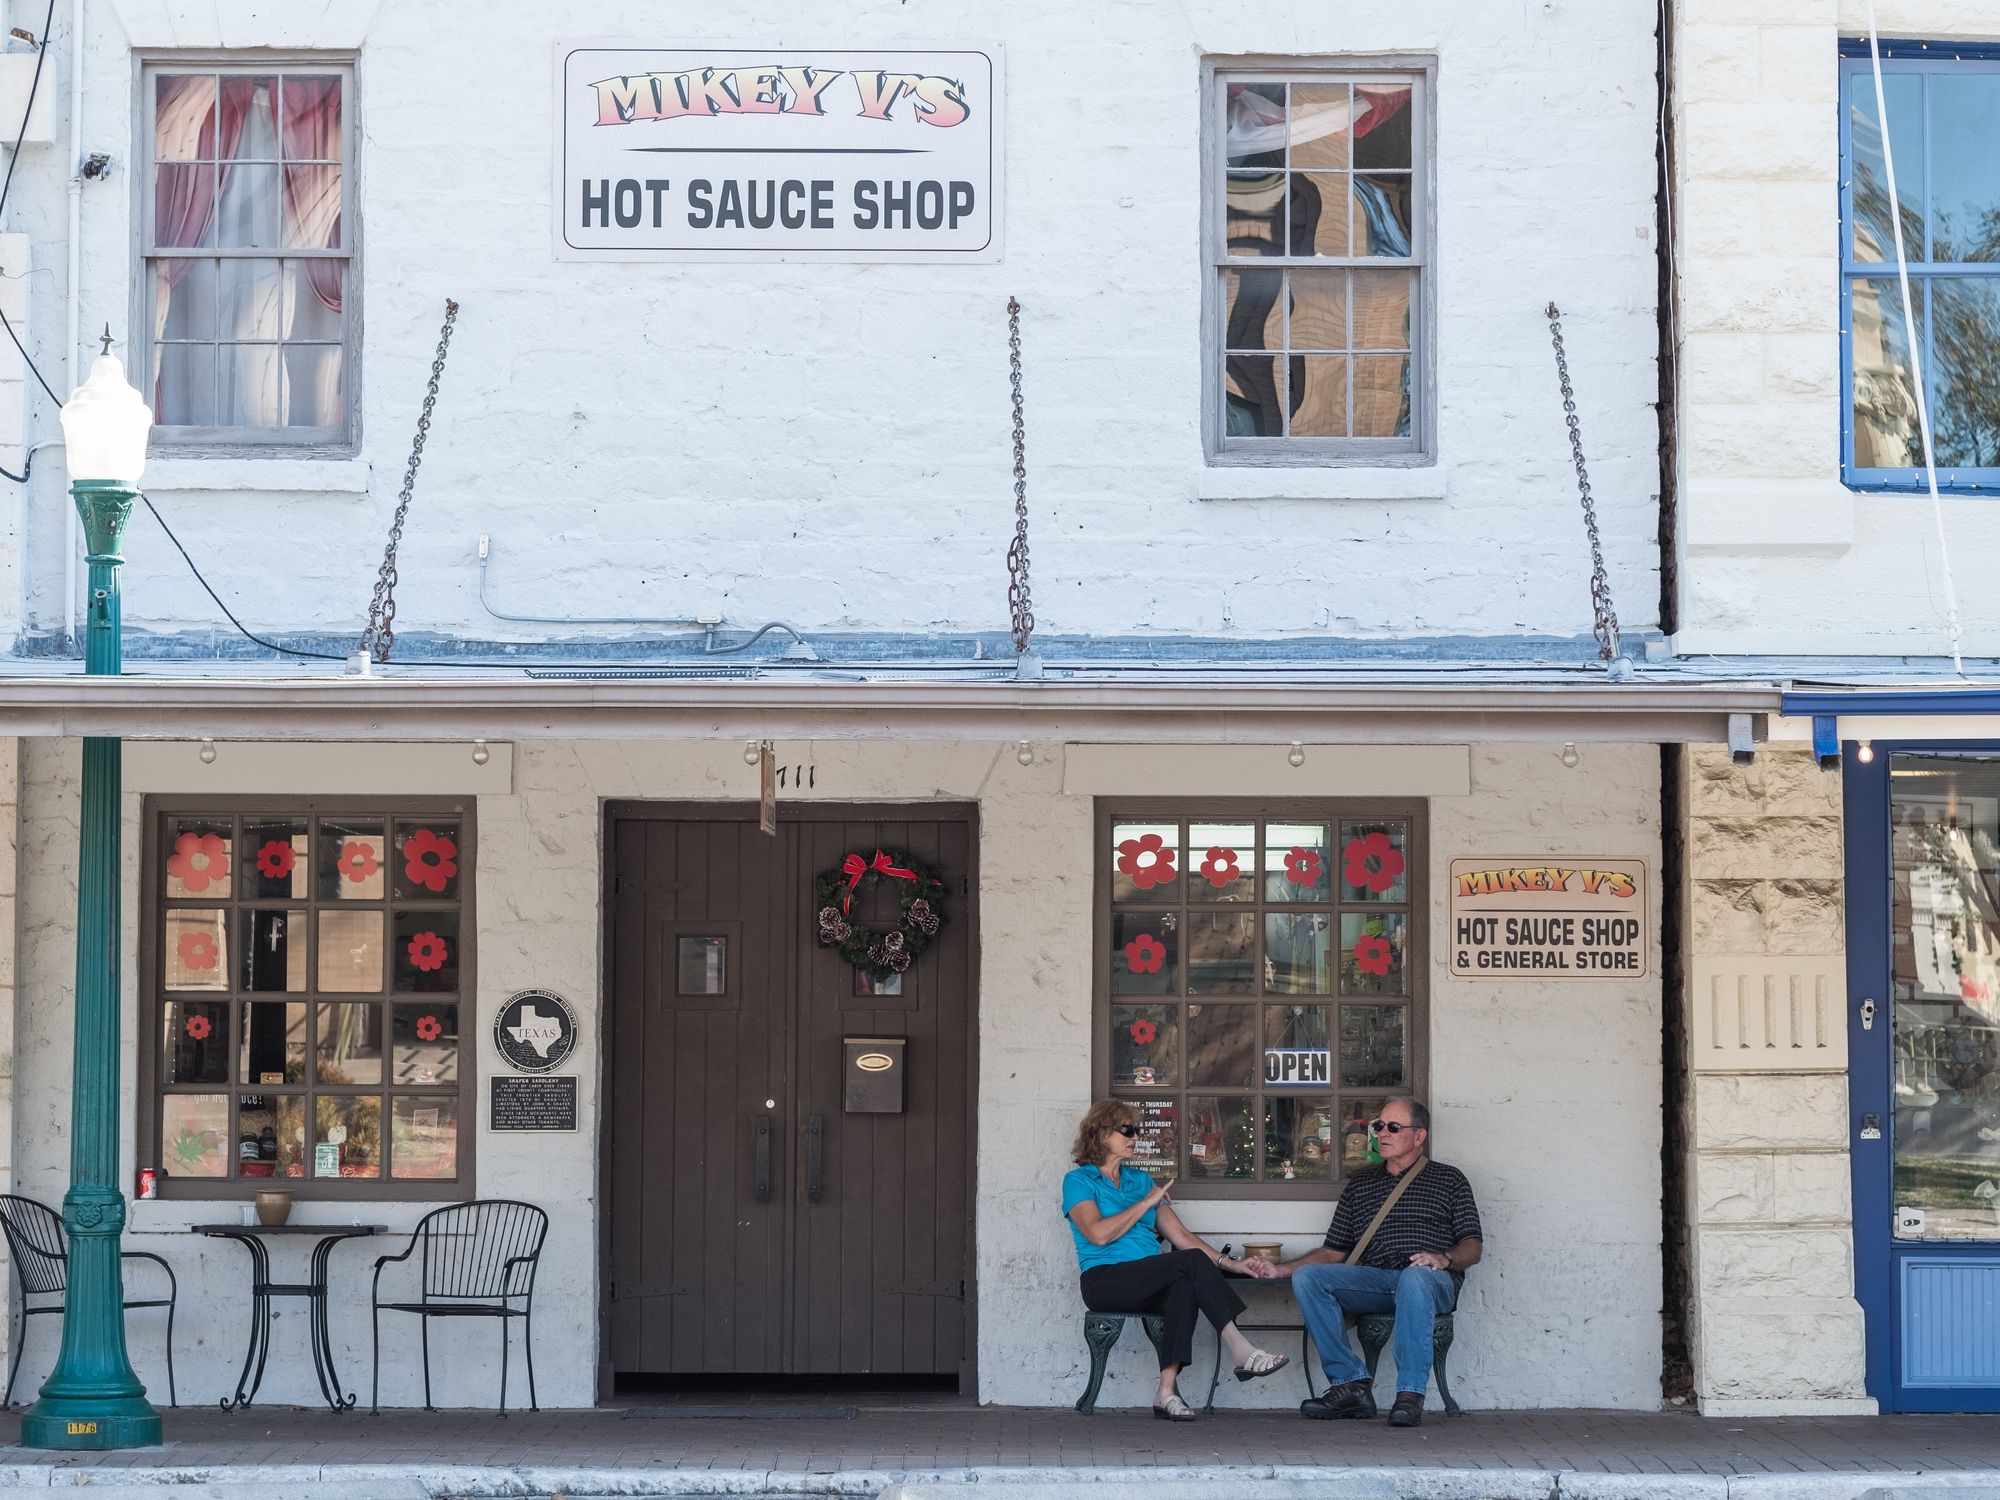 Mikey V's Hot Sauce Shop in Georgetown, Texas